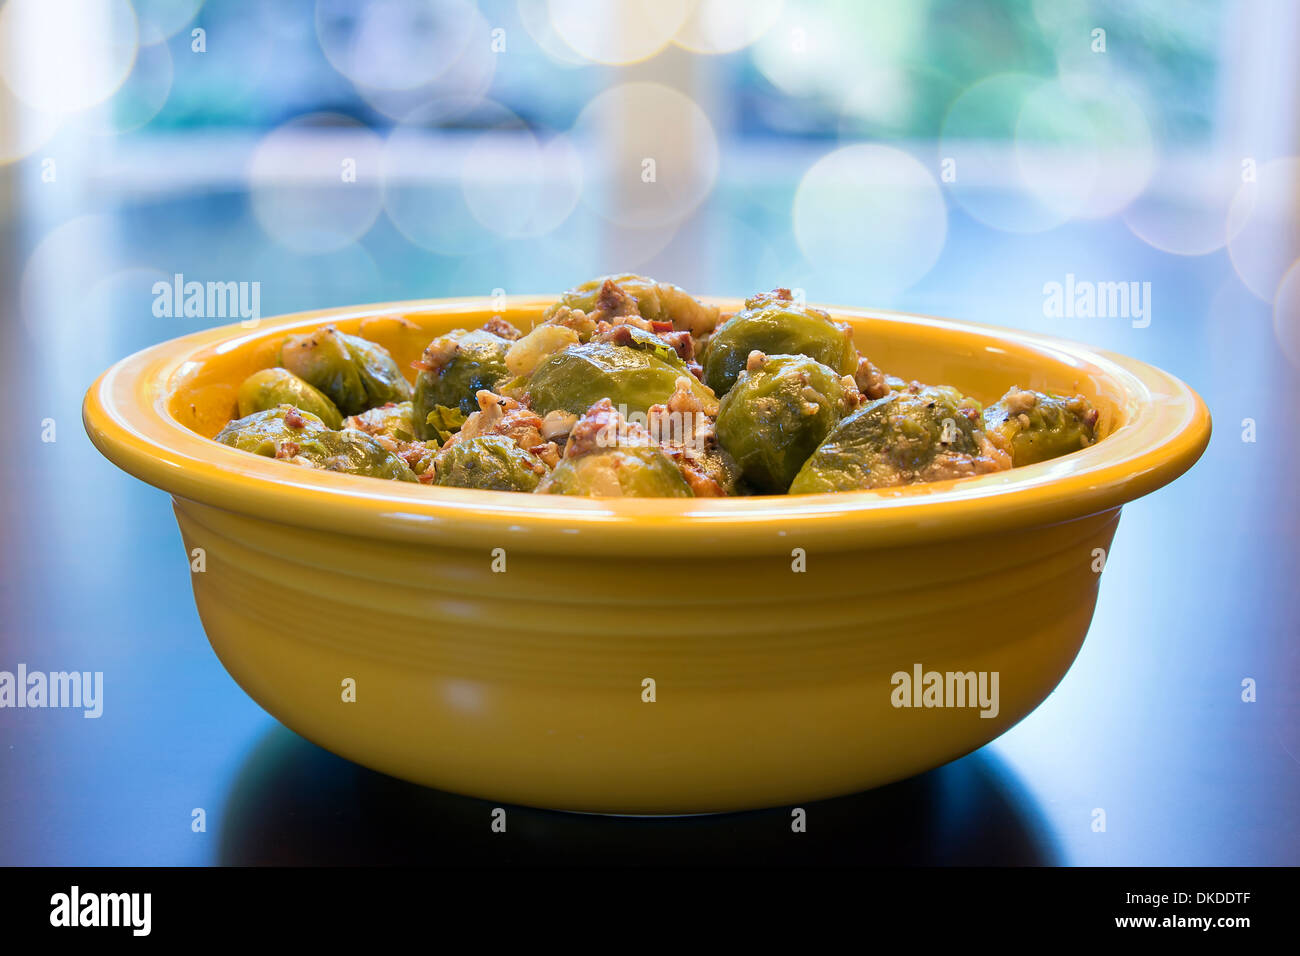 Brussel Sprouts Cooked with Pancetta Olive Oil and Onions in Yellow Bowl with Bokeh Blurred Background Stock Photo